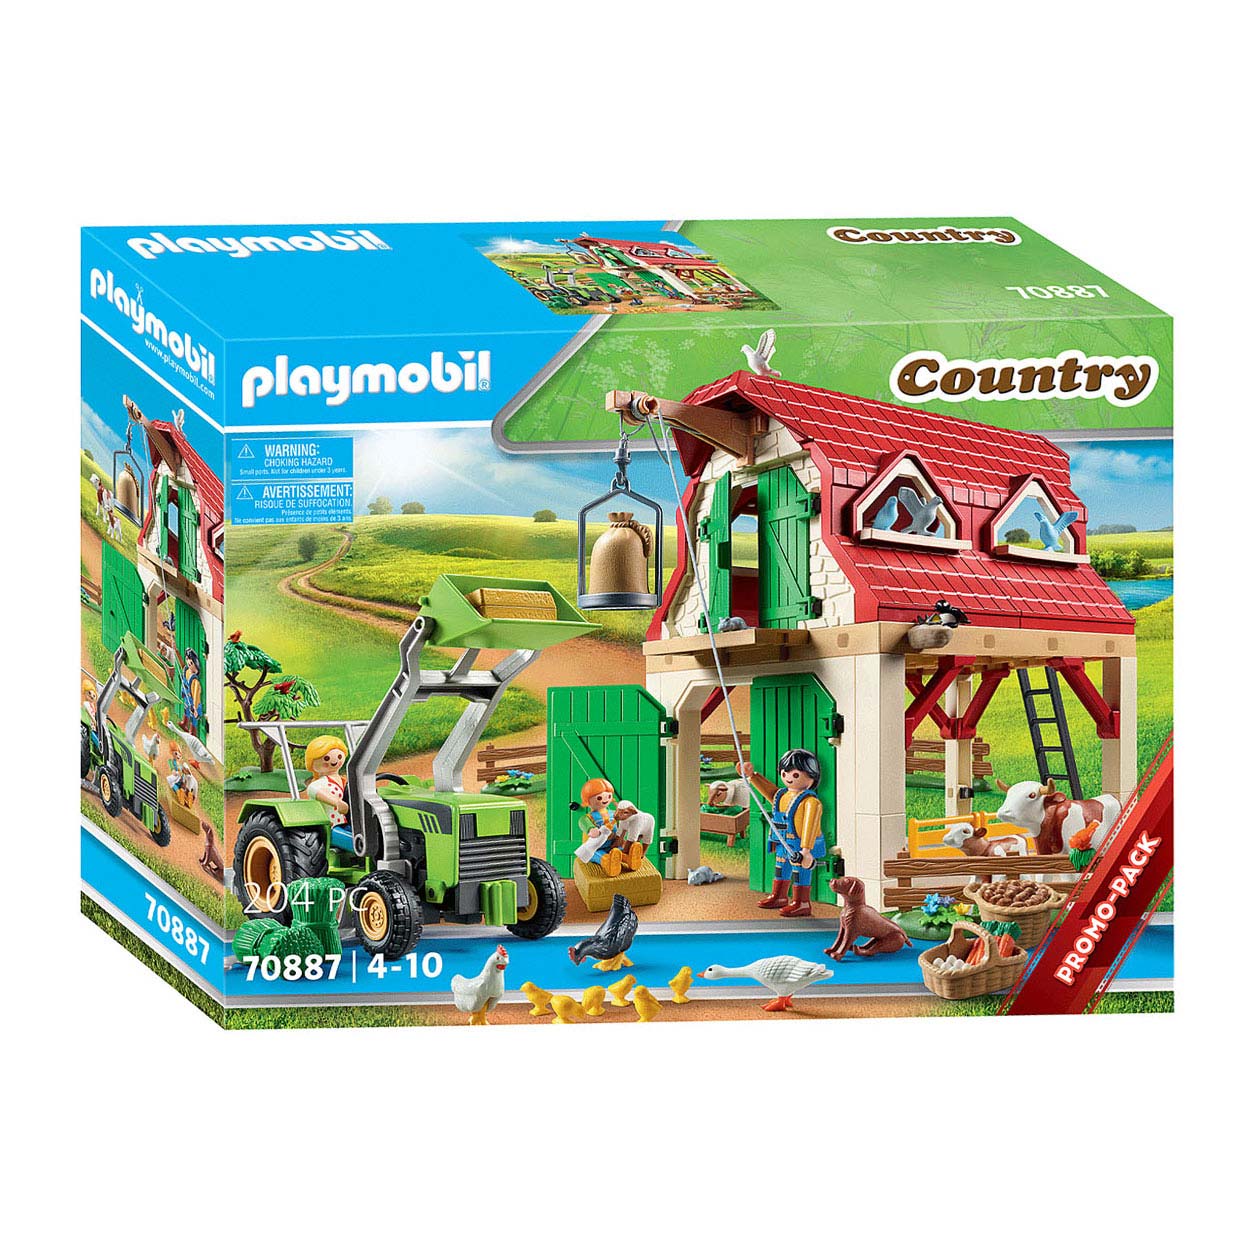 iets Prematuur Keel Playmobil Country Farm with Small Animal Breeding - 70887 | Thimble Toys